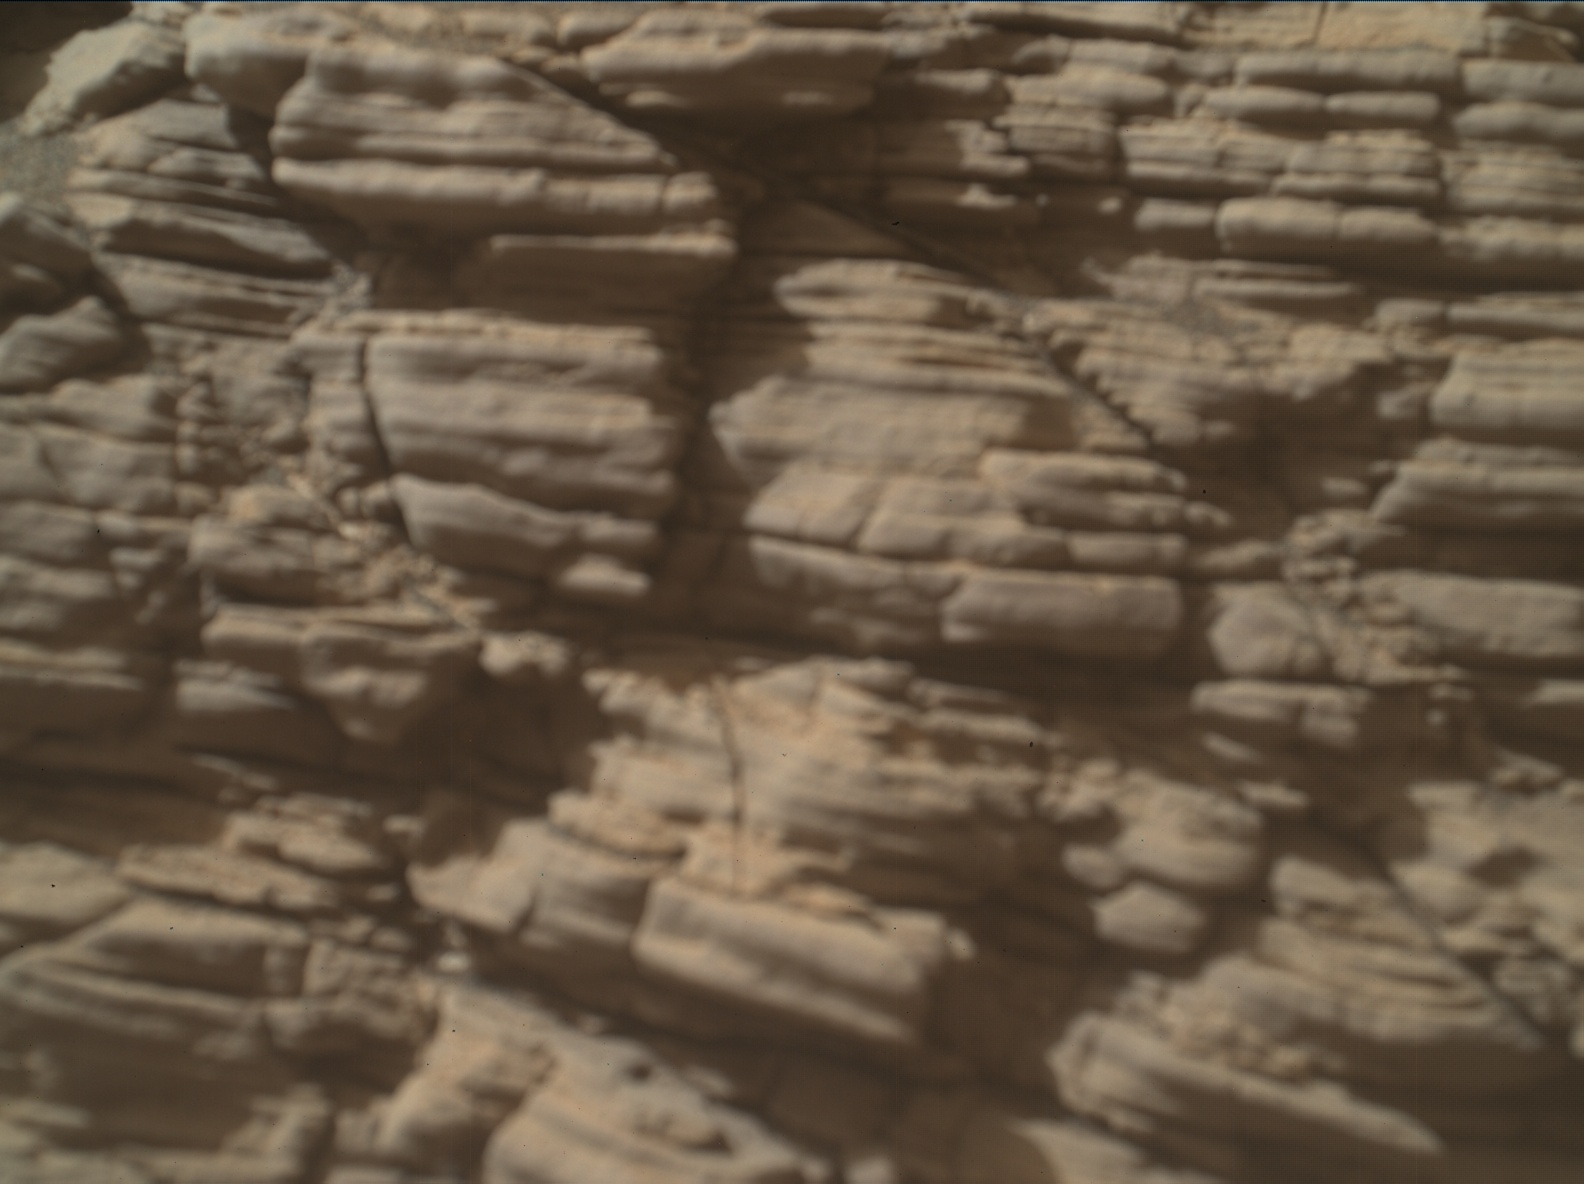 Nasa's Mars rover Curiosity acquired this image using its Mars Hand Lens Imager (MAHLI) on Sol 2926